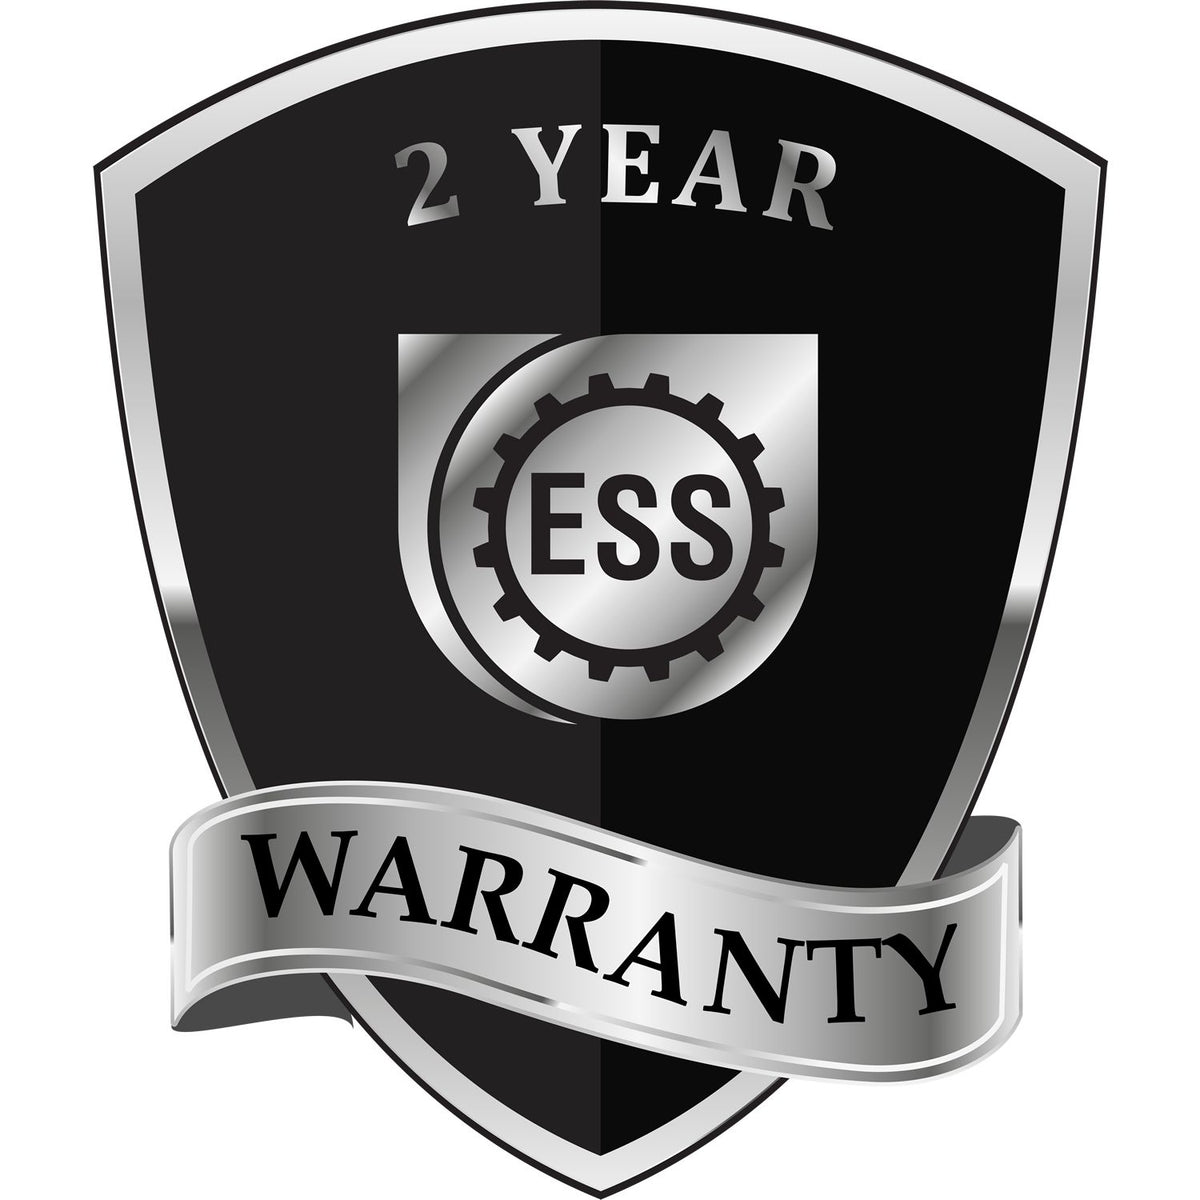 A black and silver badge or emblem showing warranty information for the Gift Pennsylvania Geologist Seal